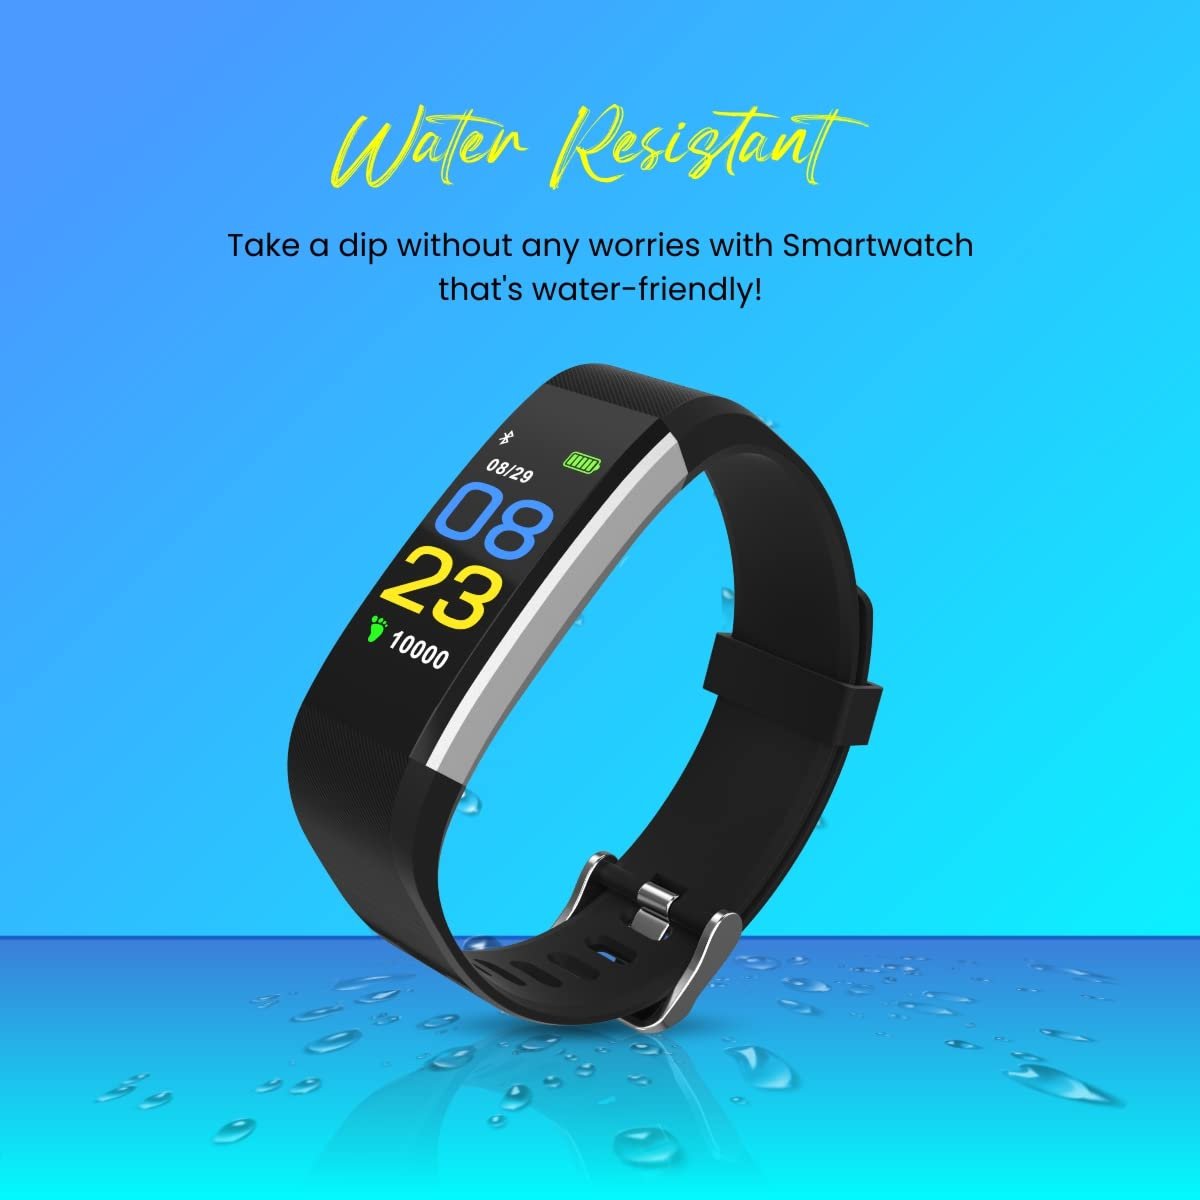 Kronos X3 Smart Fitness Band Black 4 Shop Mobile Accessories Online in India